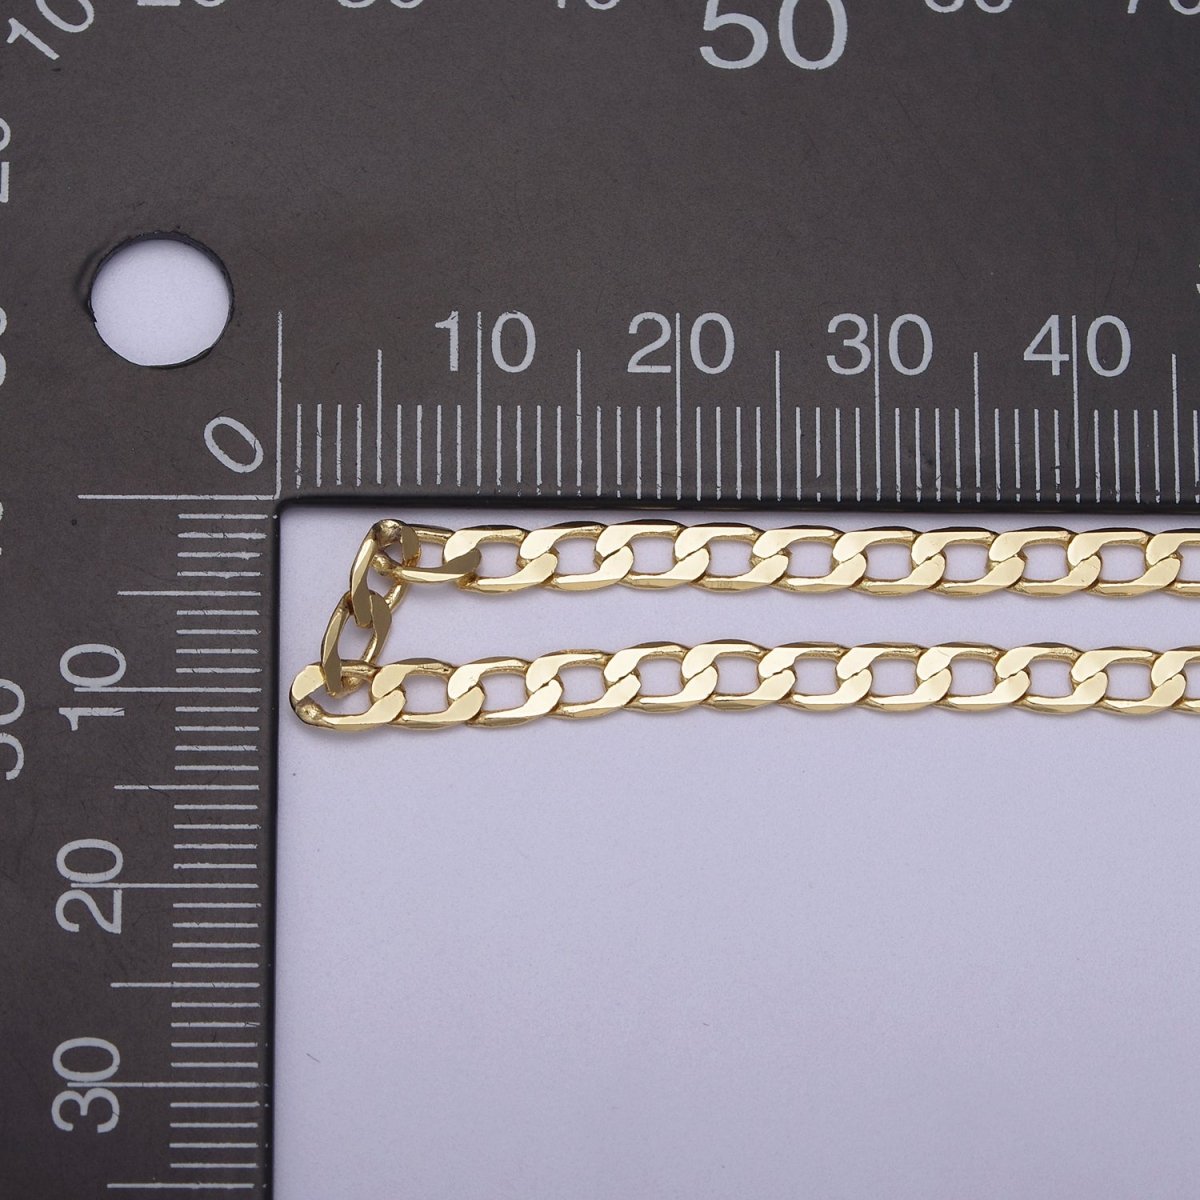 24K Gold Filled Figaro Curb Chain, Flat 3.5mm Width Figaro Unfinished Chain For Jewelry Making Supply Component | ROLL-688, ROLL-689 Clearance Pricing - DLUXCA